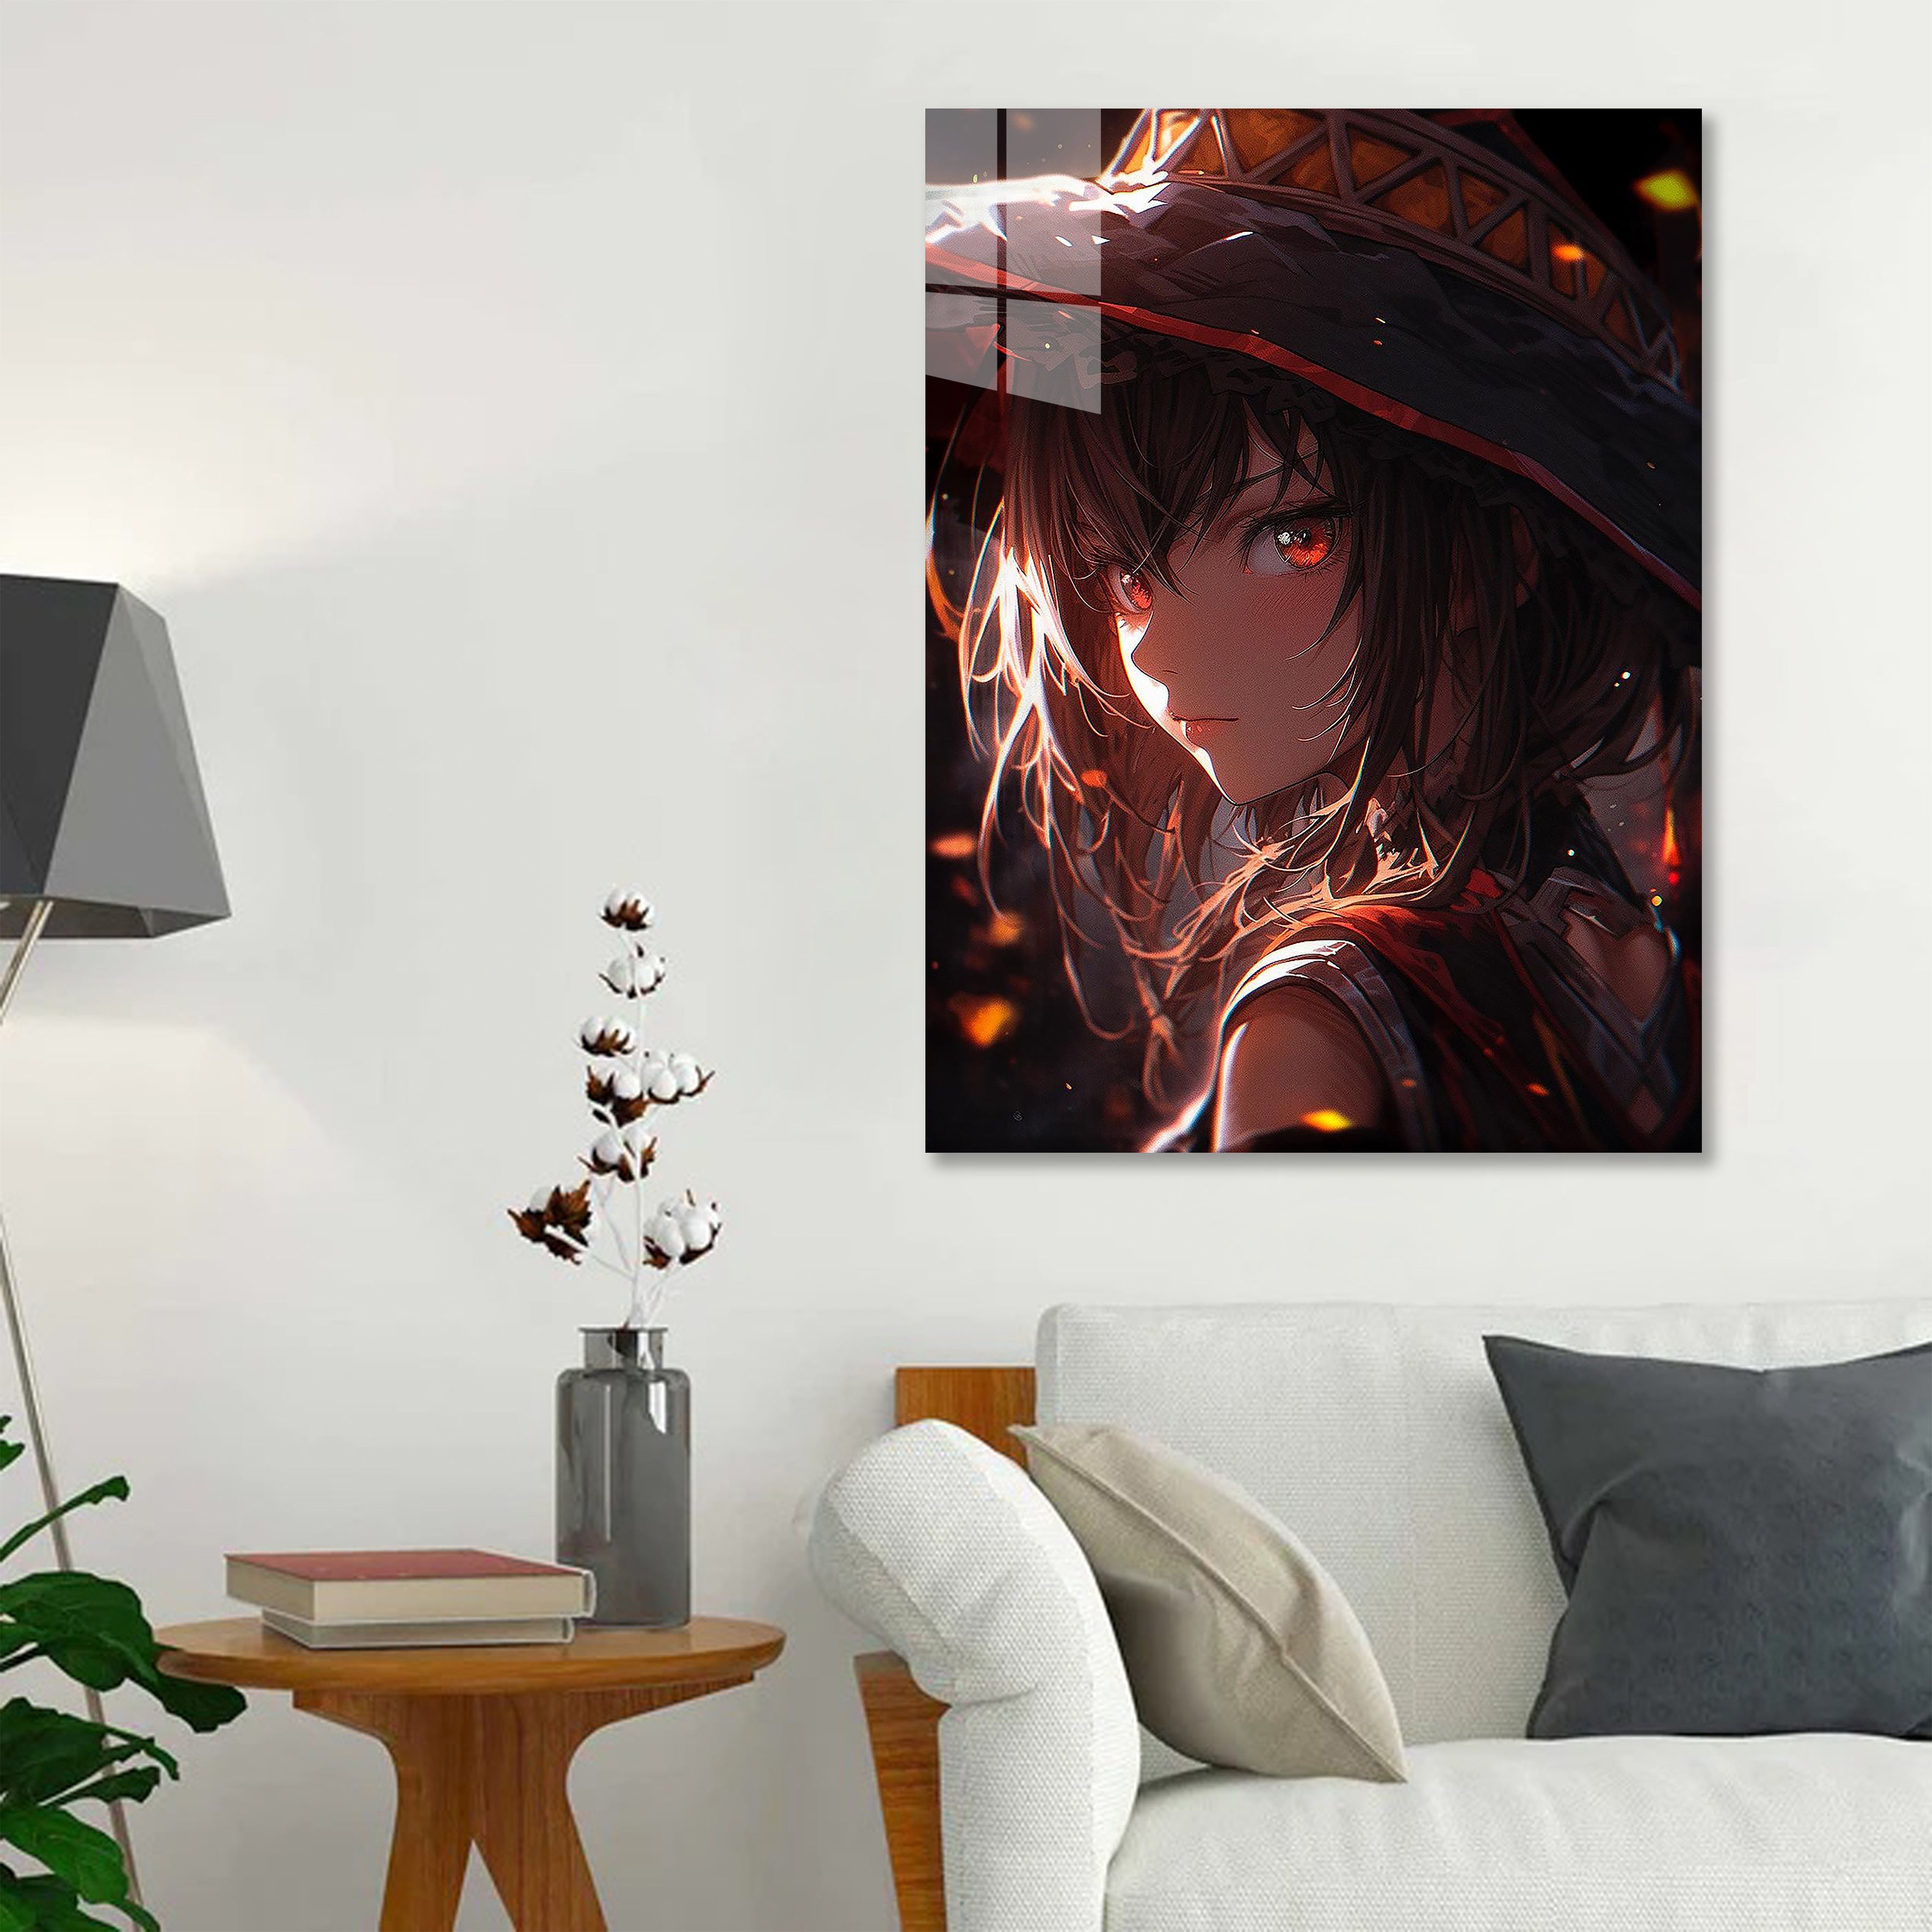 B00045-Megumin-designed by @By_Monkai